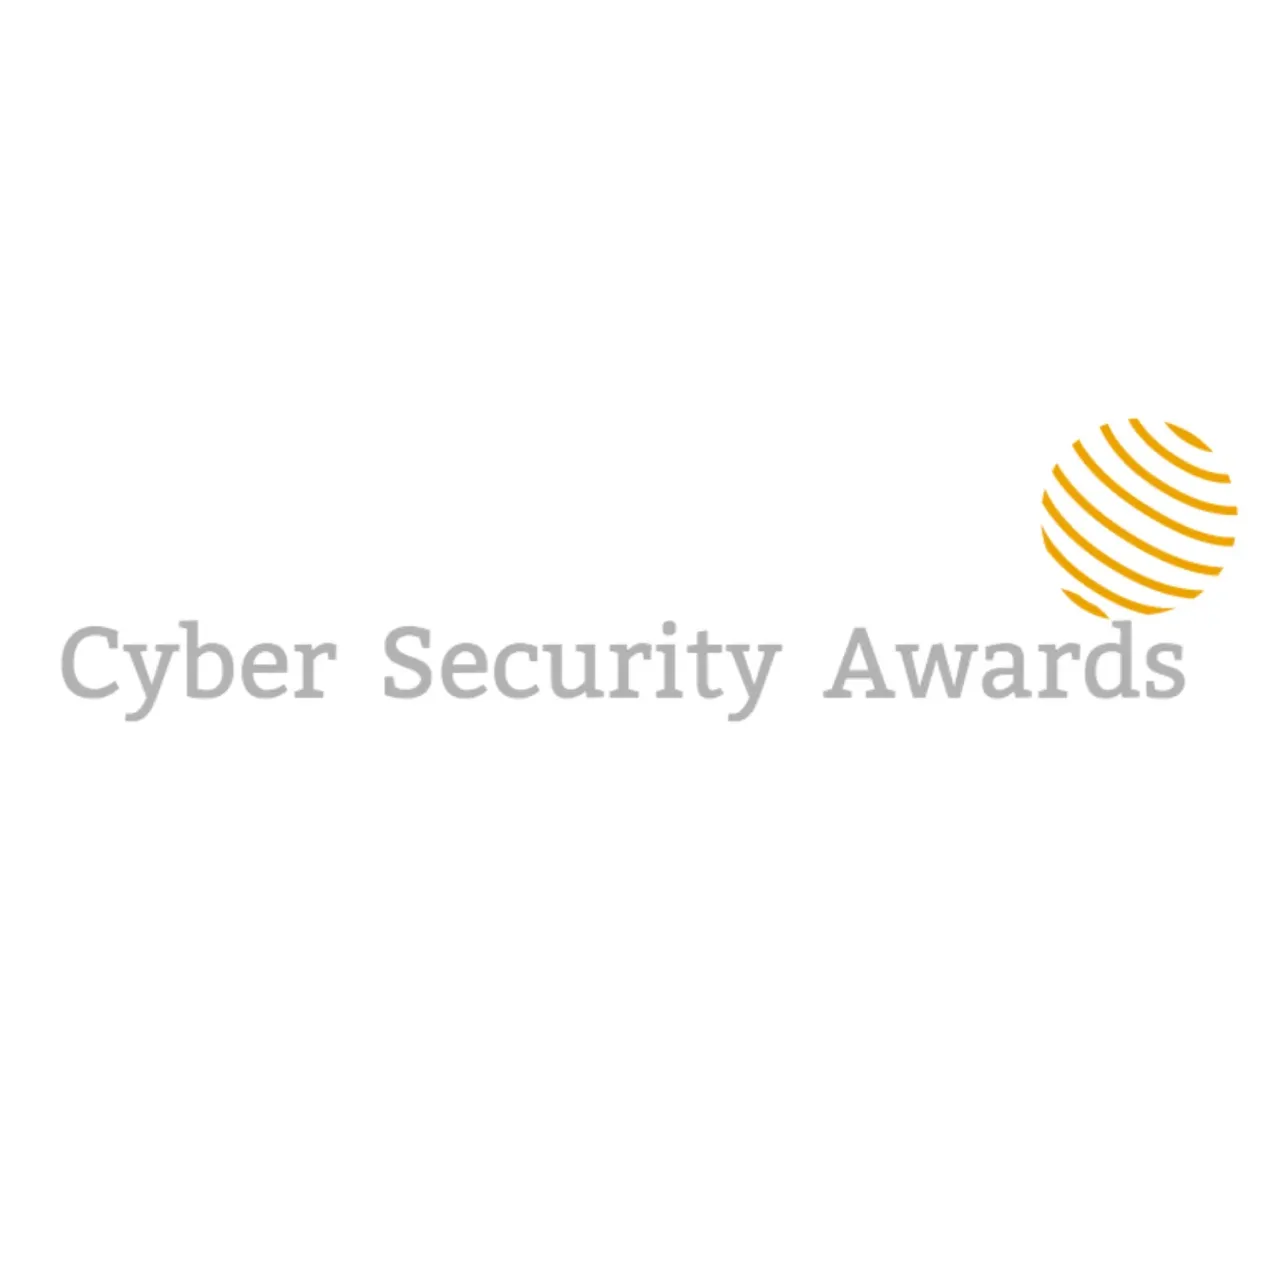 Uniac reaches the final of the 2017 Cyber Security Awards